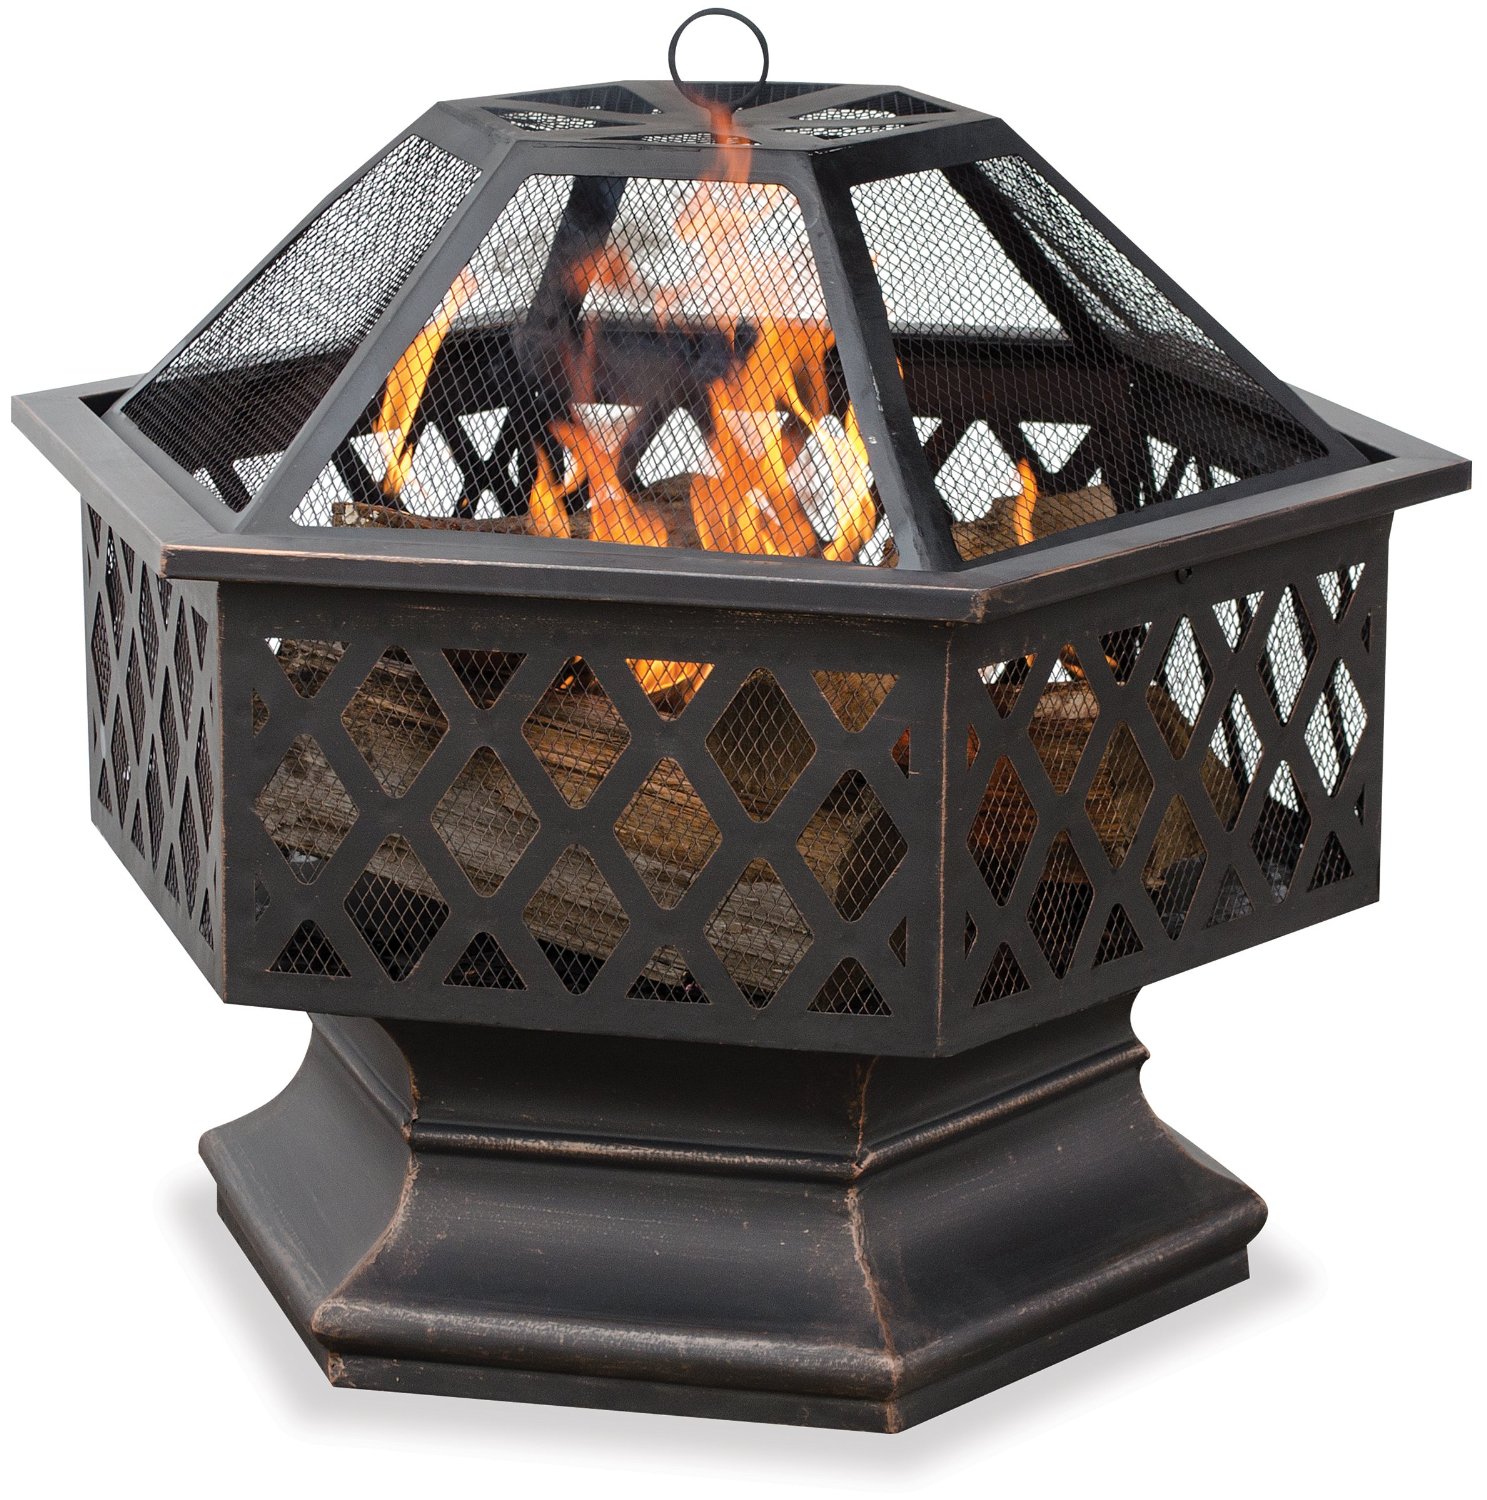 manufactured fire pit